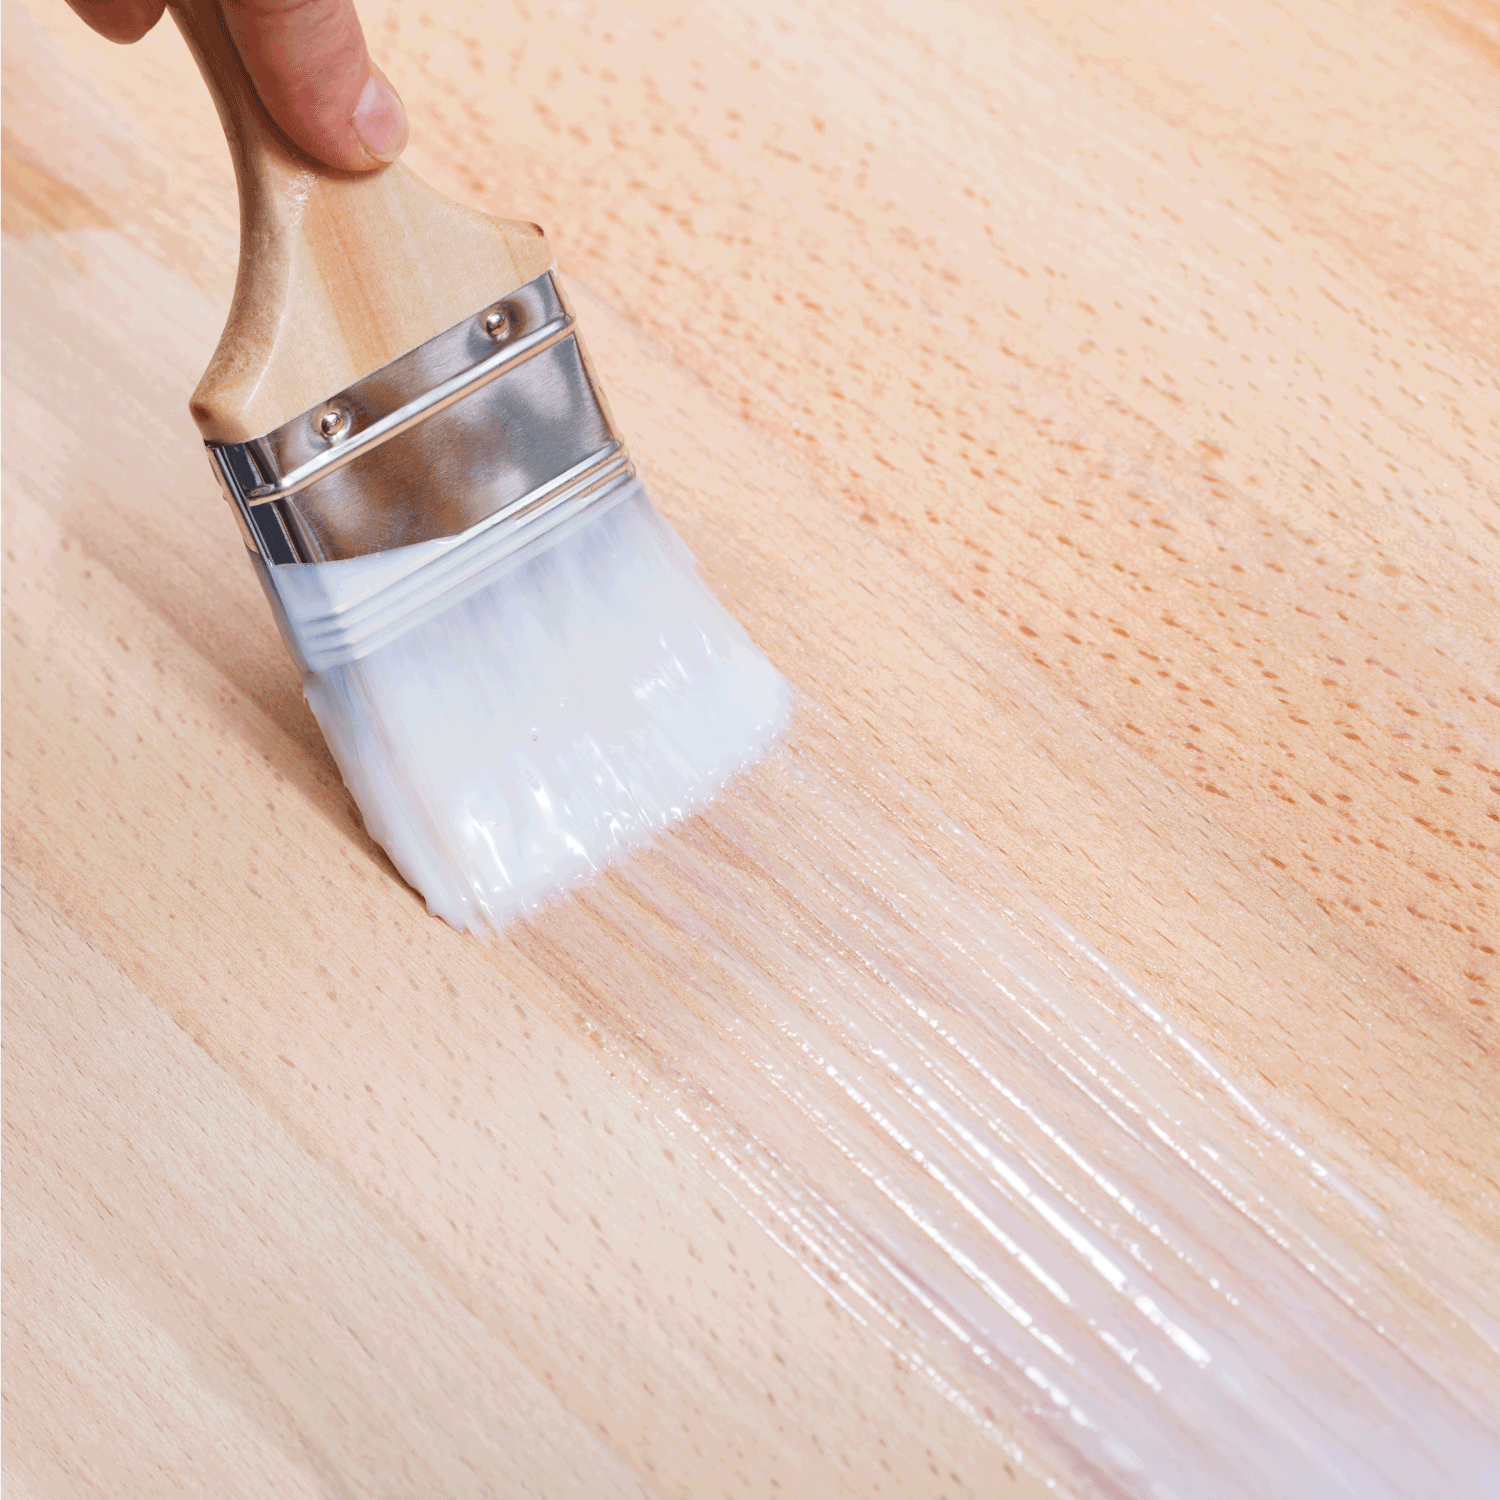 putting layer of clear lacquer on surface of beech top table by paint brush